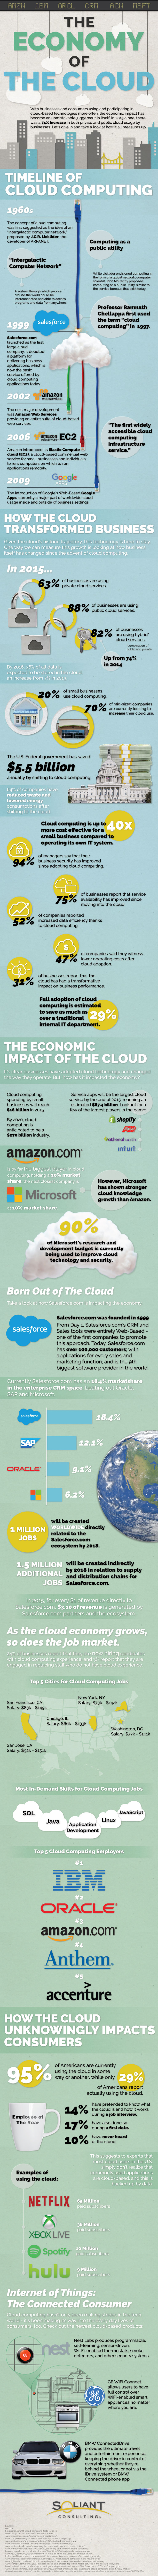 The Economy of the Cloud